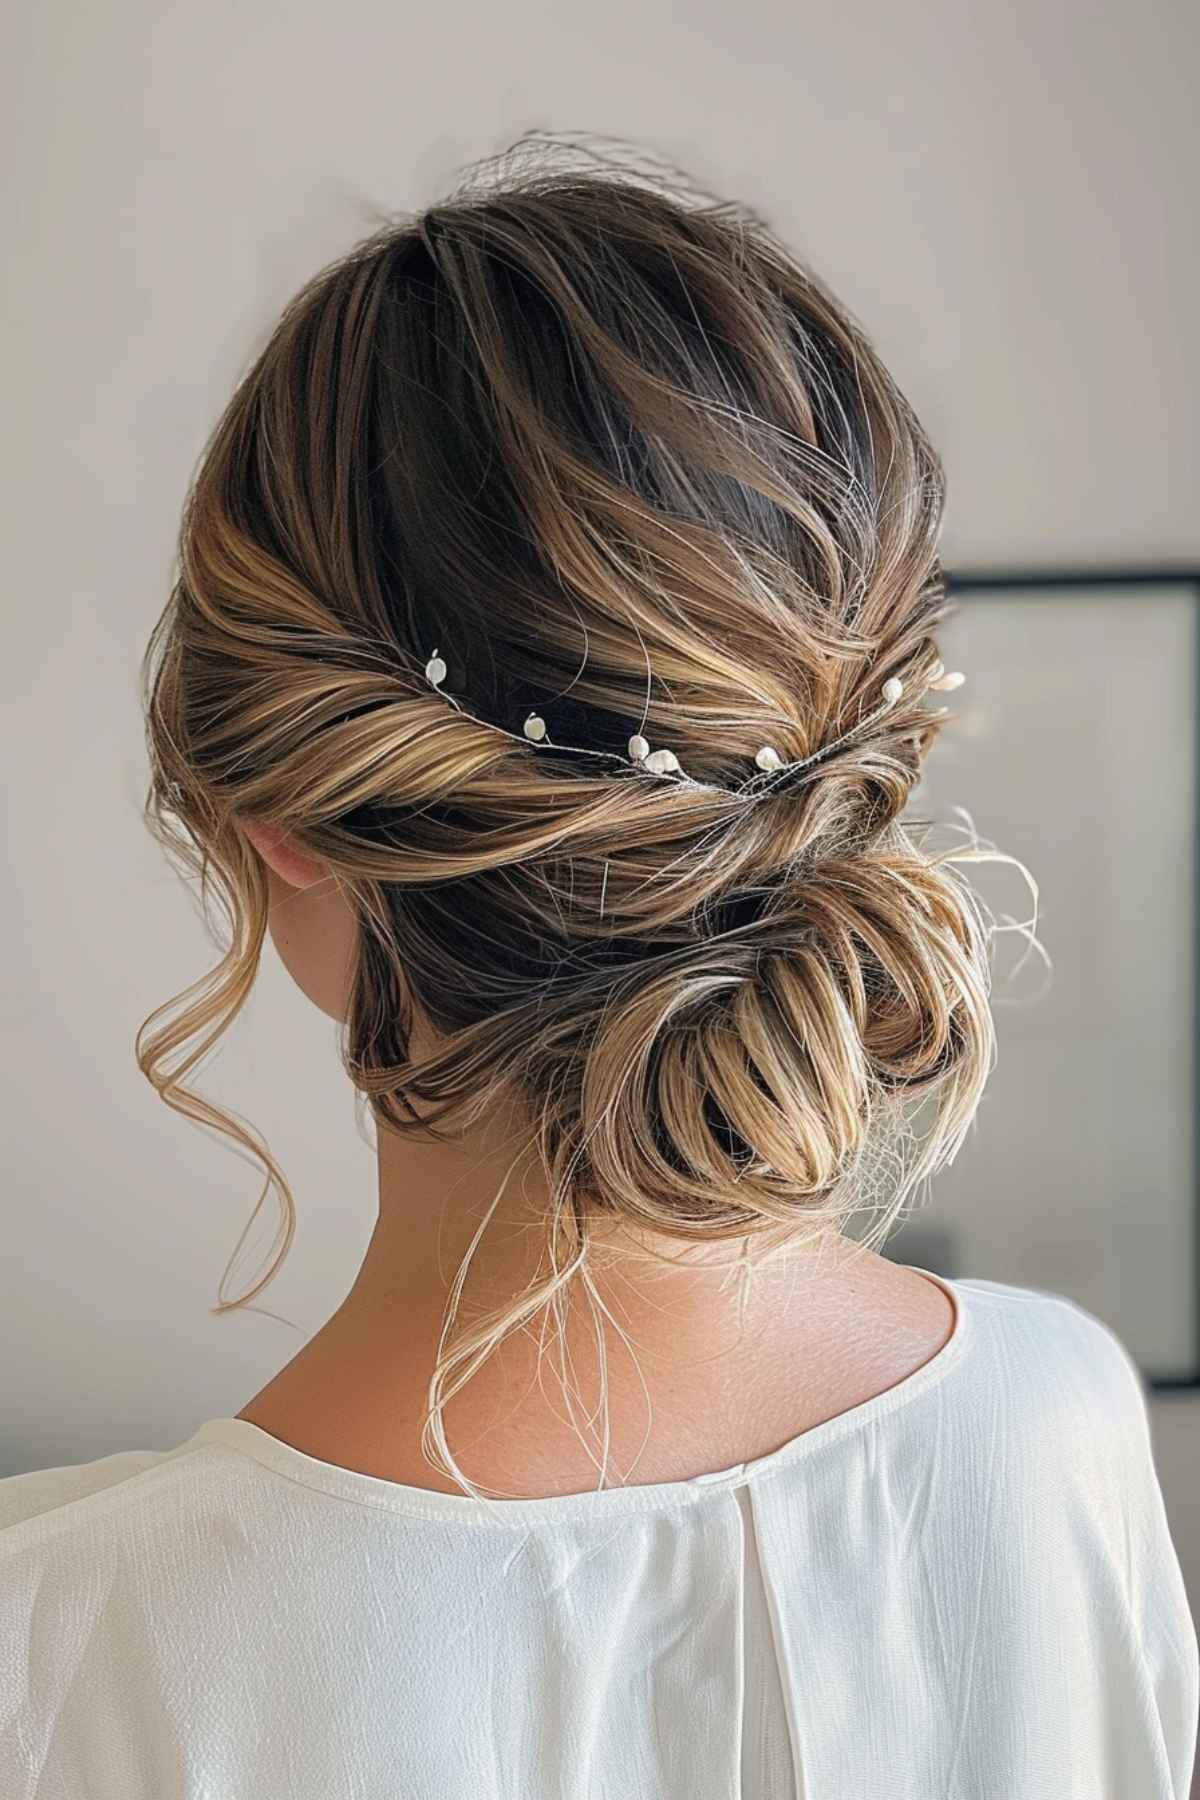 Cute twisted low bun with hair accessory for hot weather